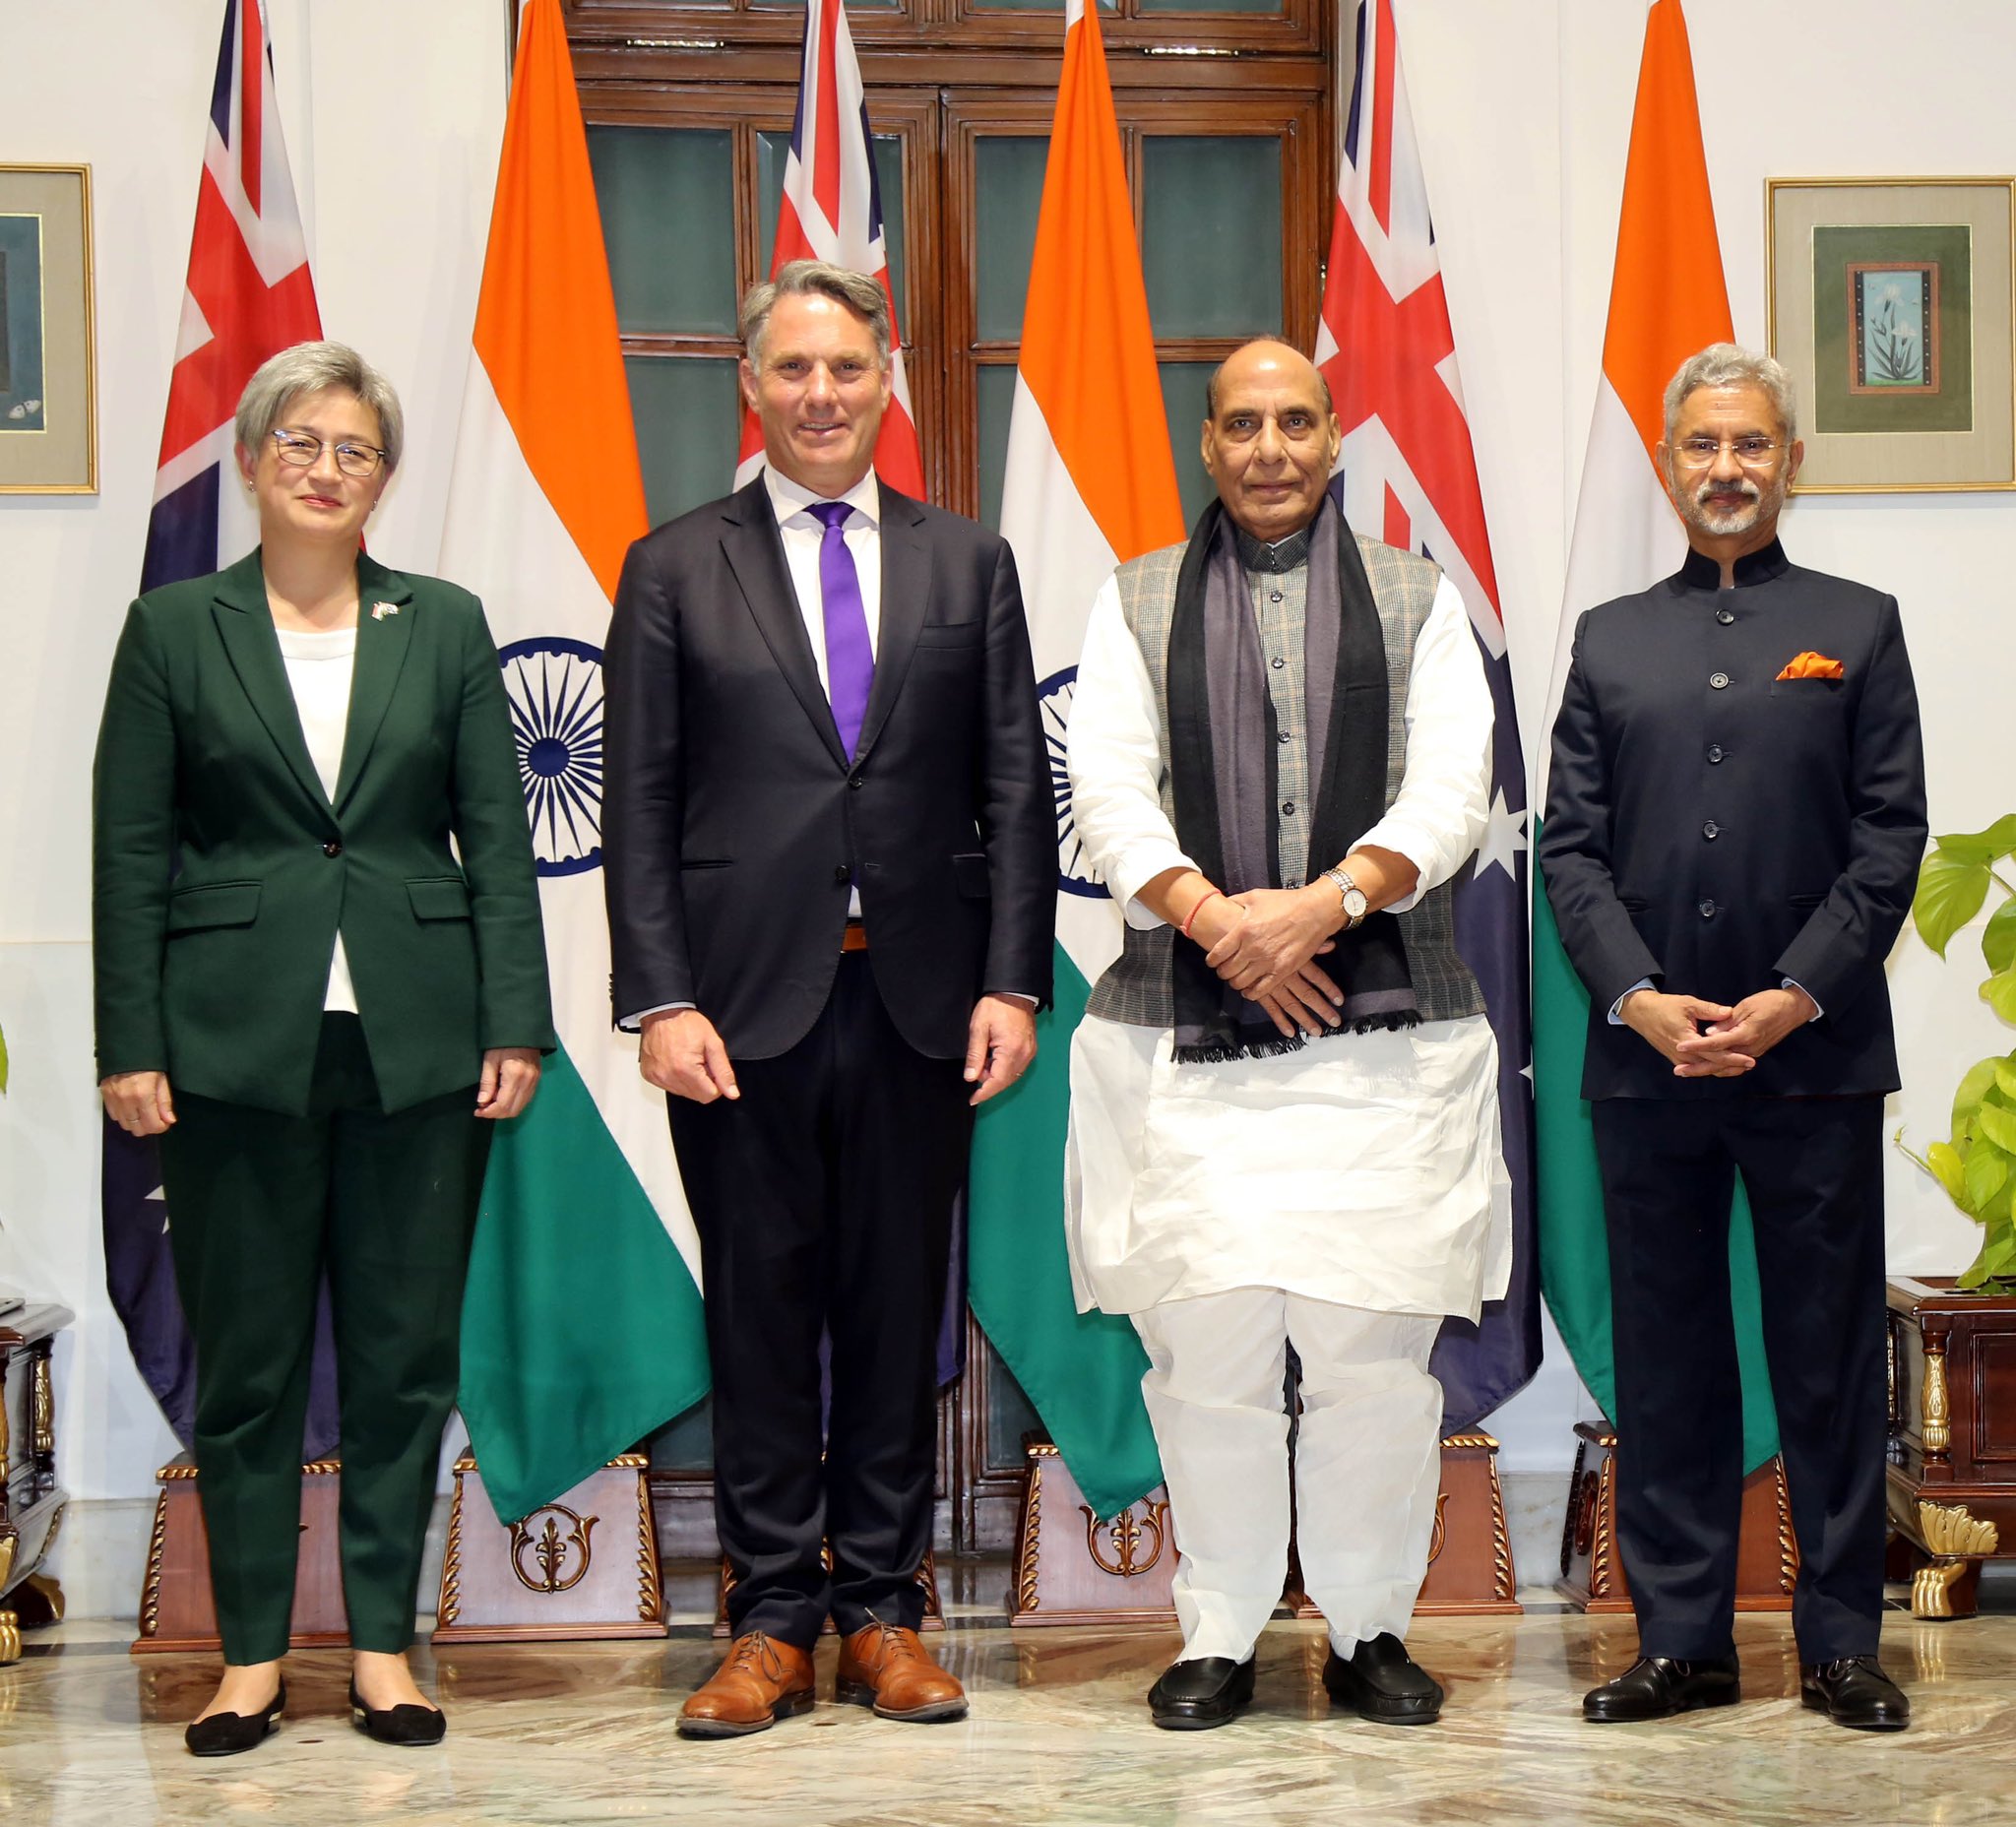 2+2 Dialogue: India, Australia agree to further strengthen ties to deal with 'exceptional challenges'